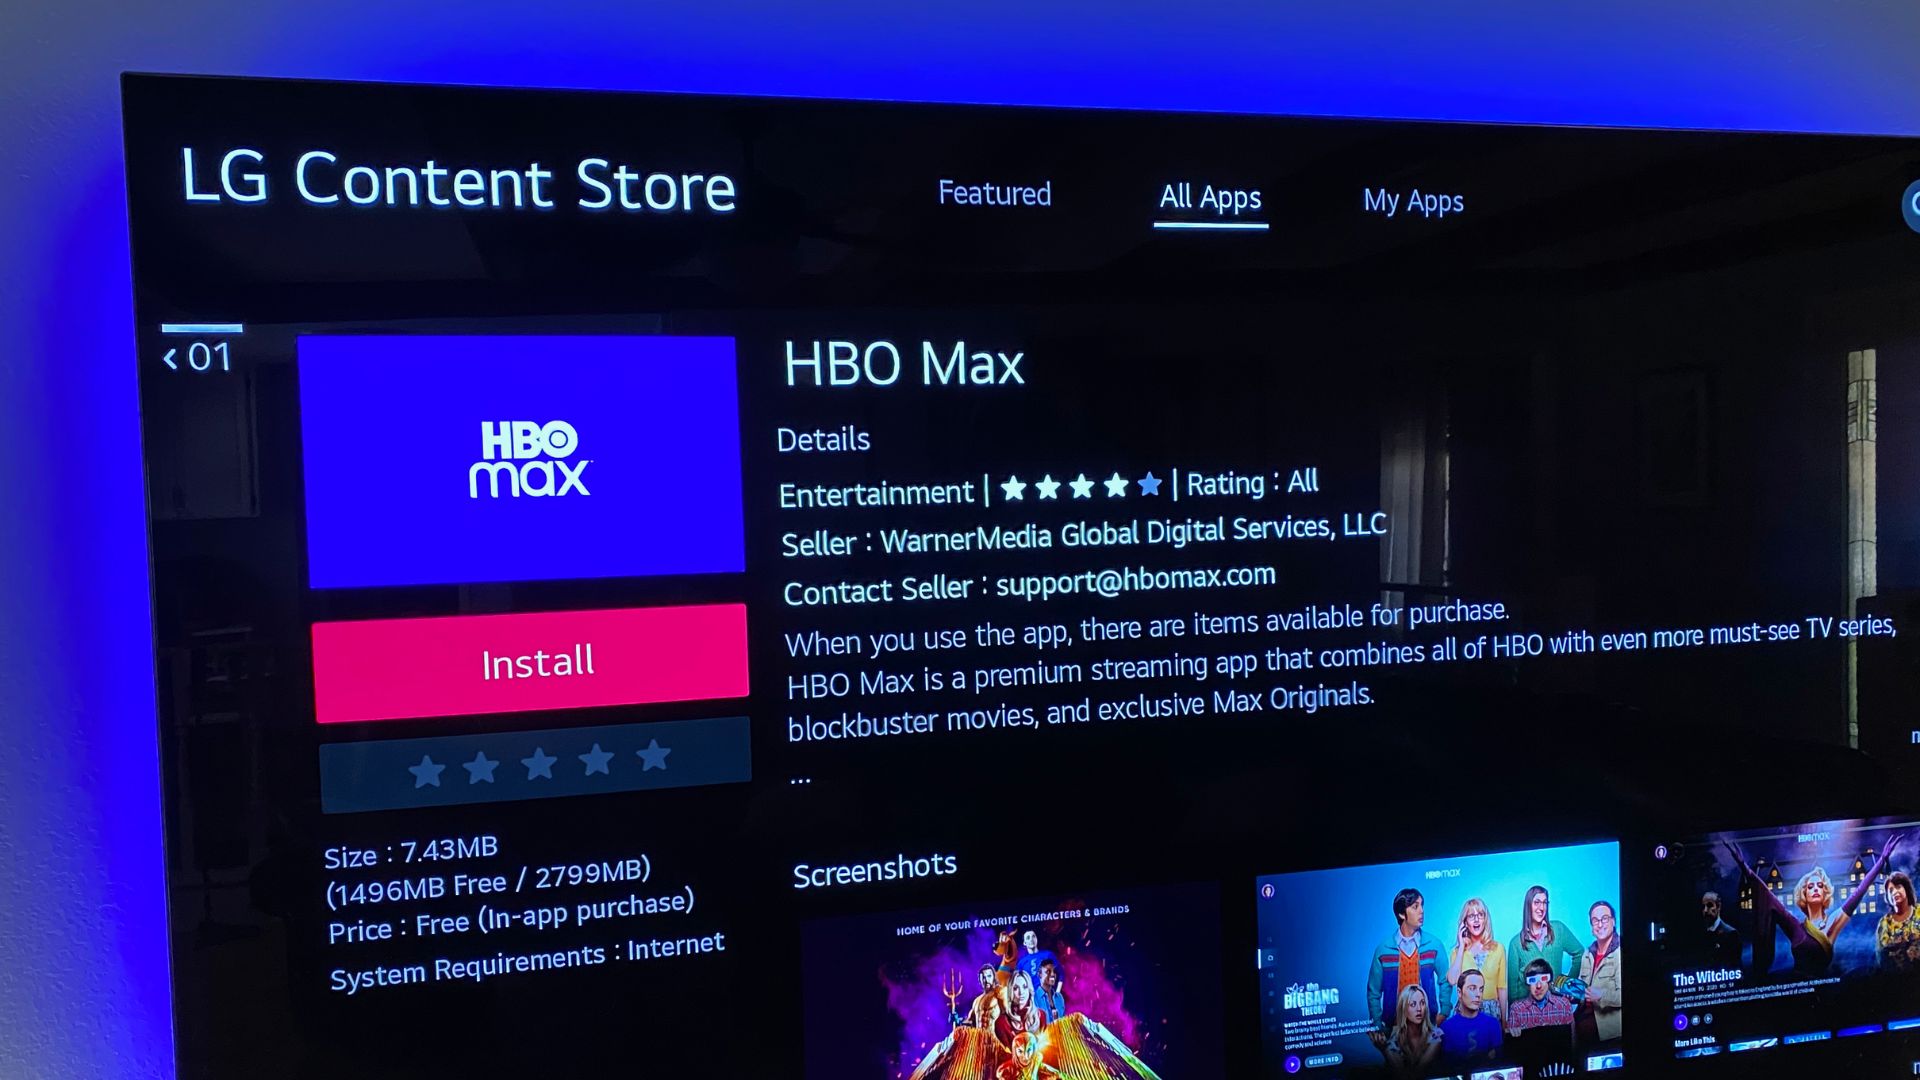 How To Get Hbo Max App On LG Smart TV